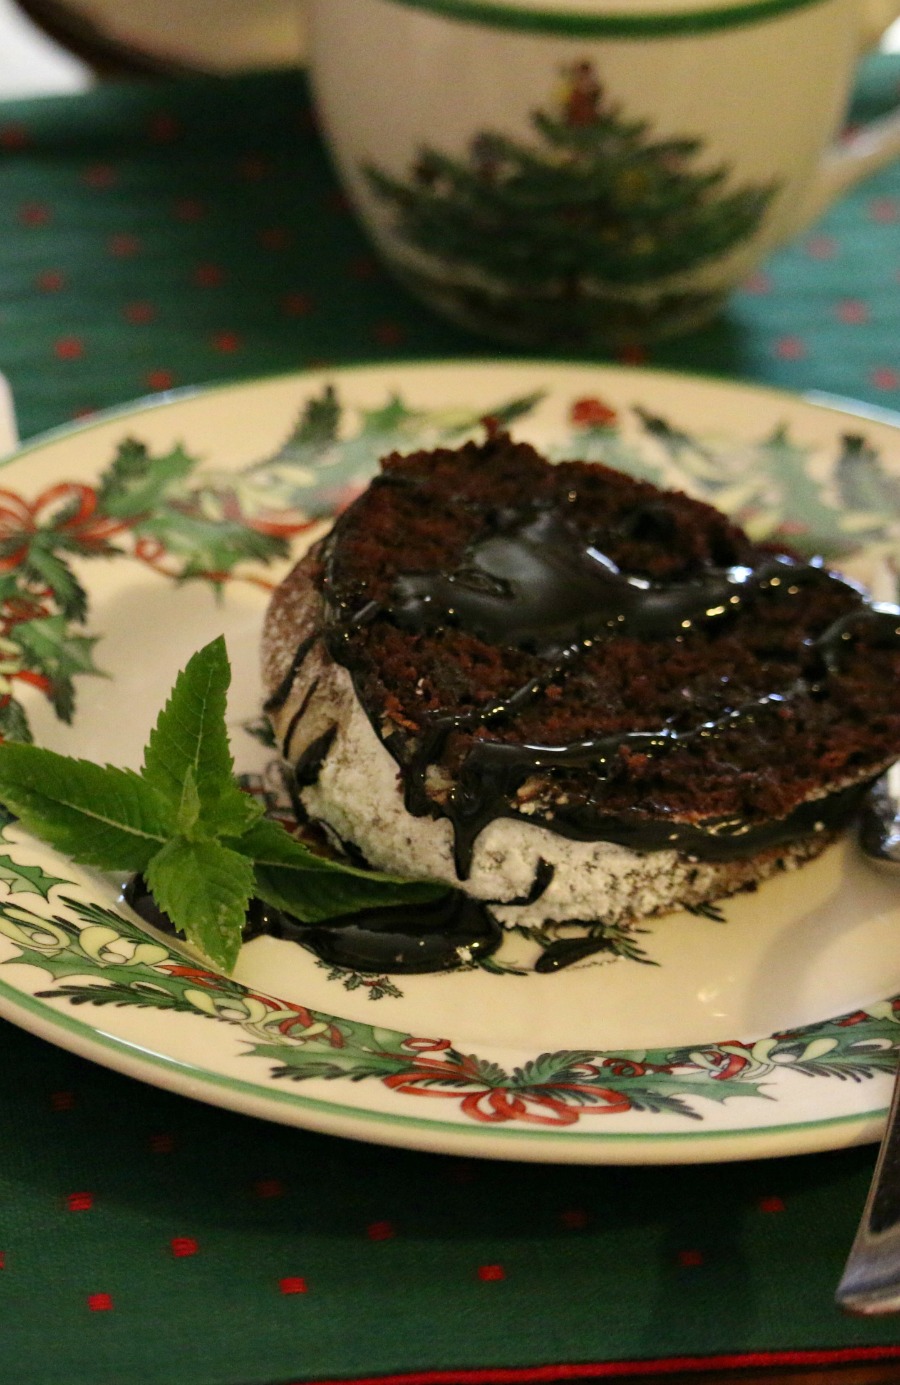 Peppermint Chocolate Cake is perfect for the holidays or any day of the year! This this wow your guests.